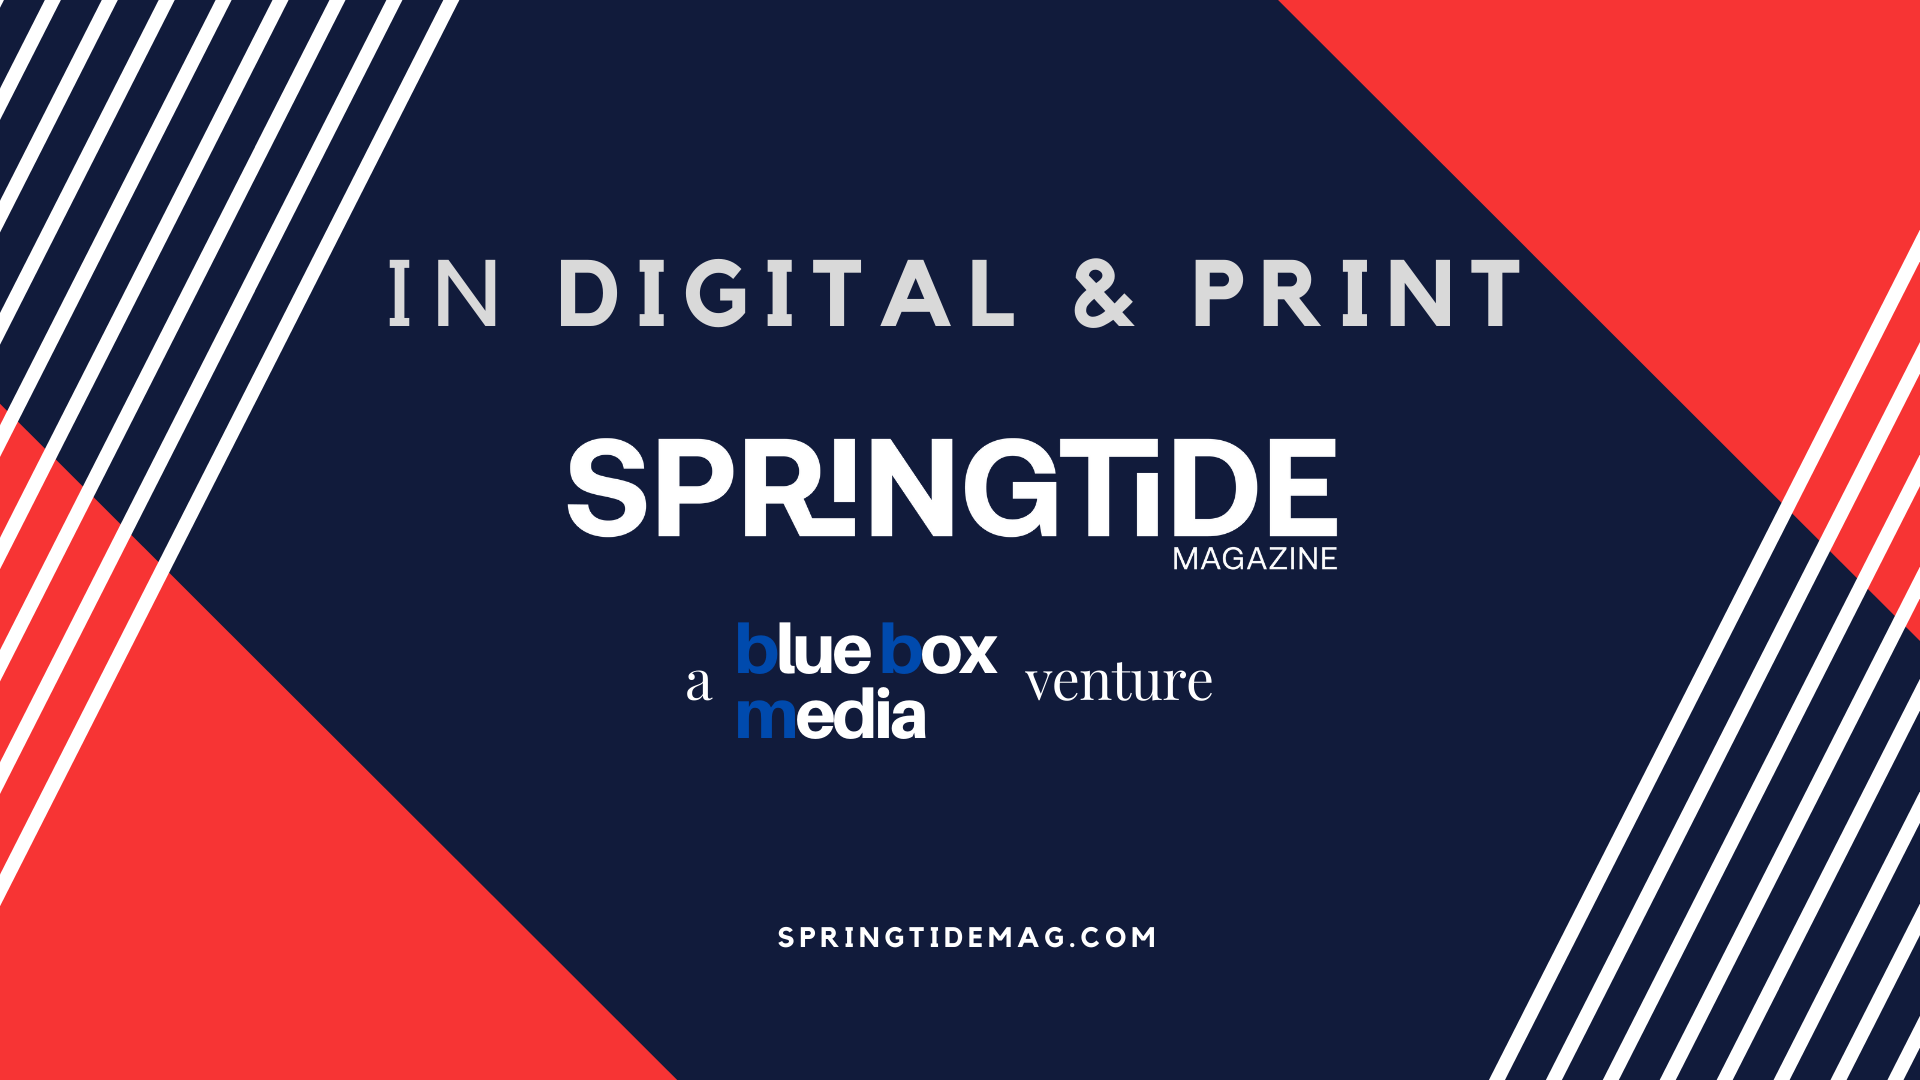 blue-box-media-launches-springtide-magazine-for-youth